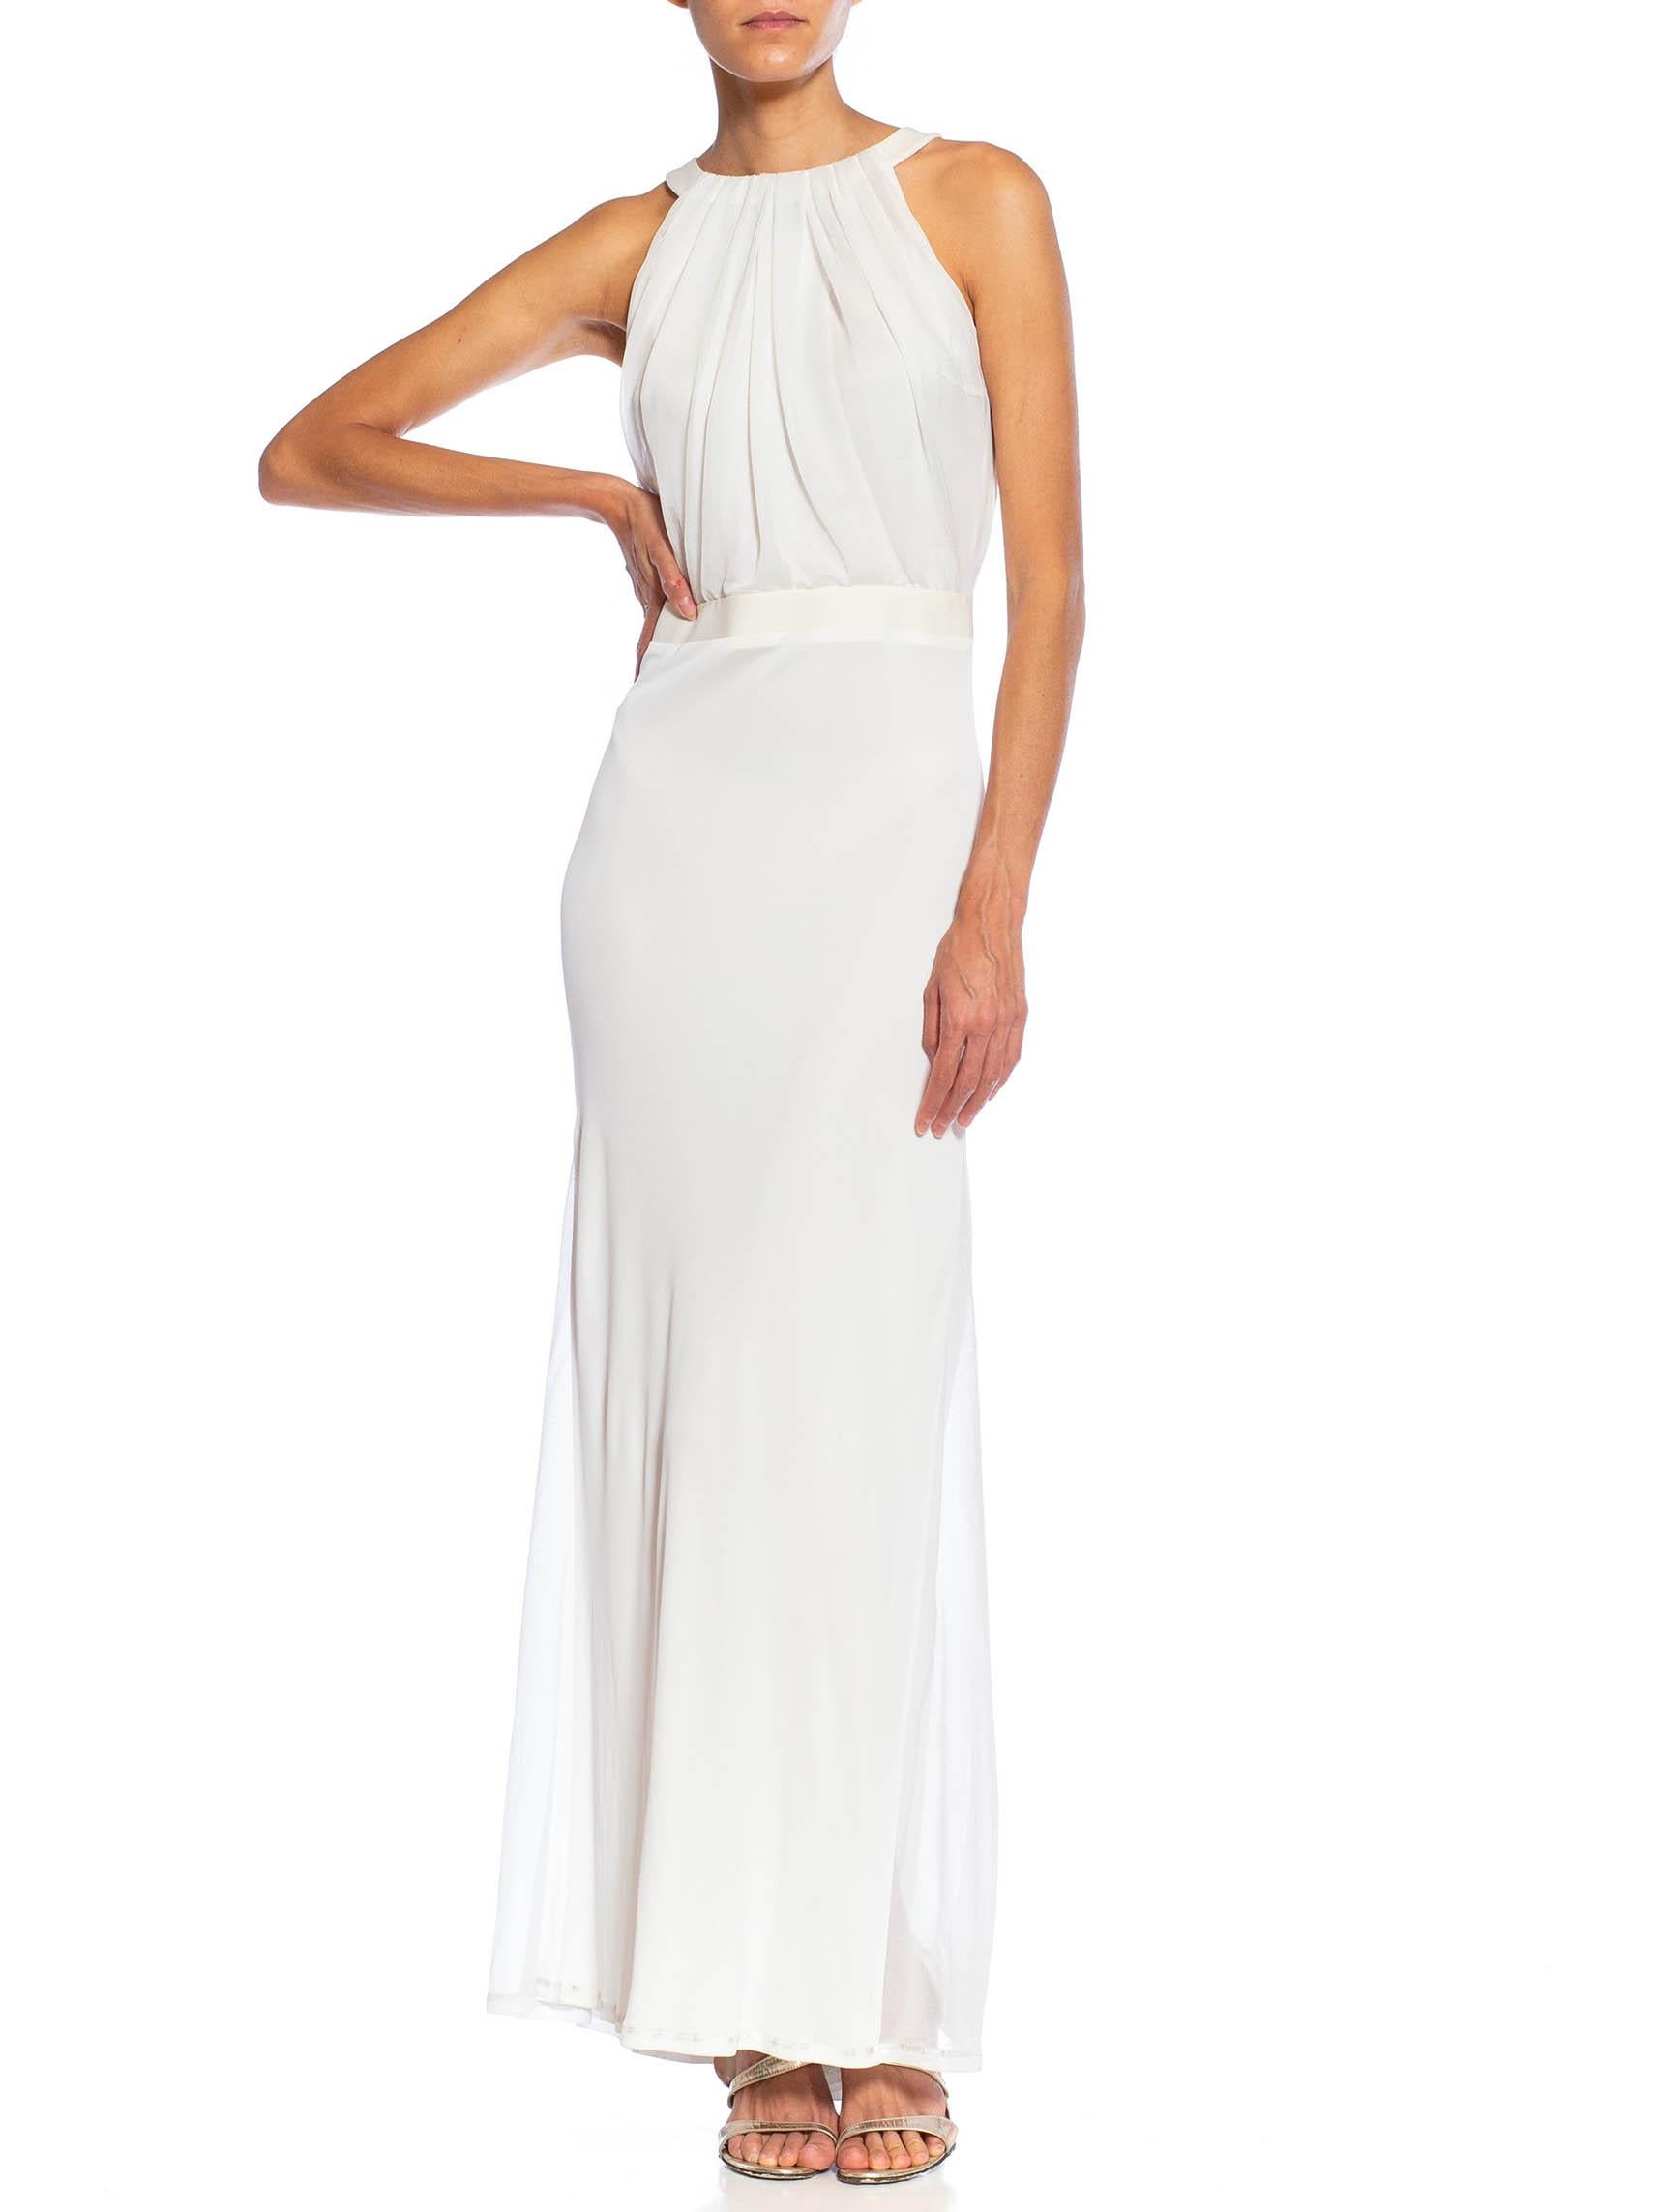 2000S EMILIO PUCCI White Viscose Blend Jersey Gown In Excellent Condition For Sale In New York, NY